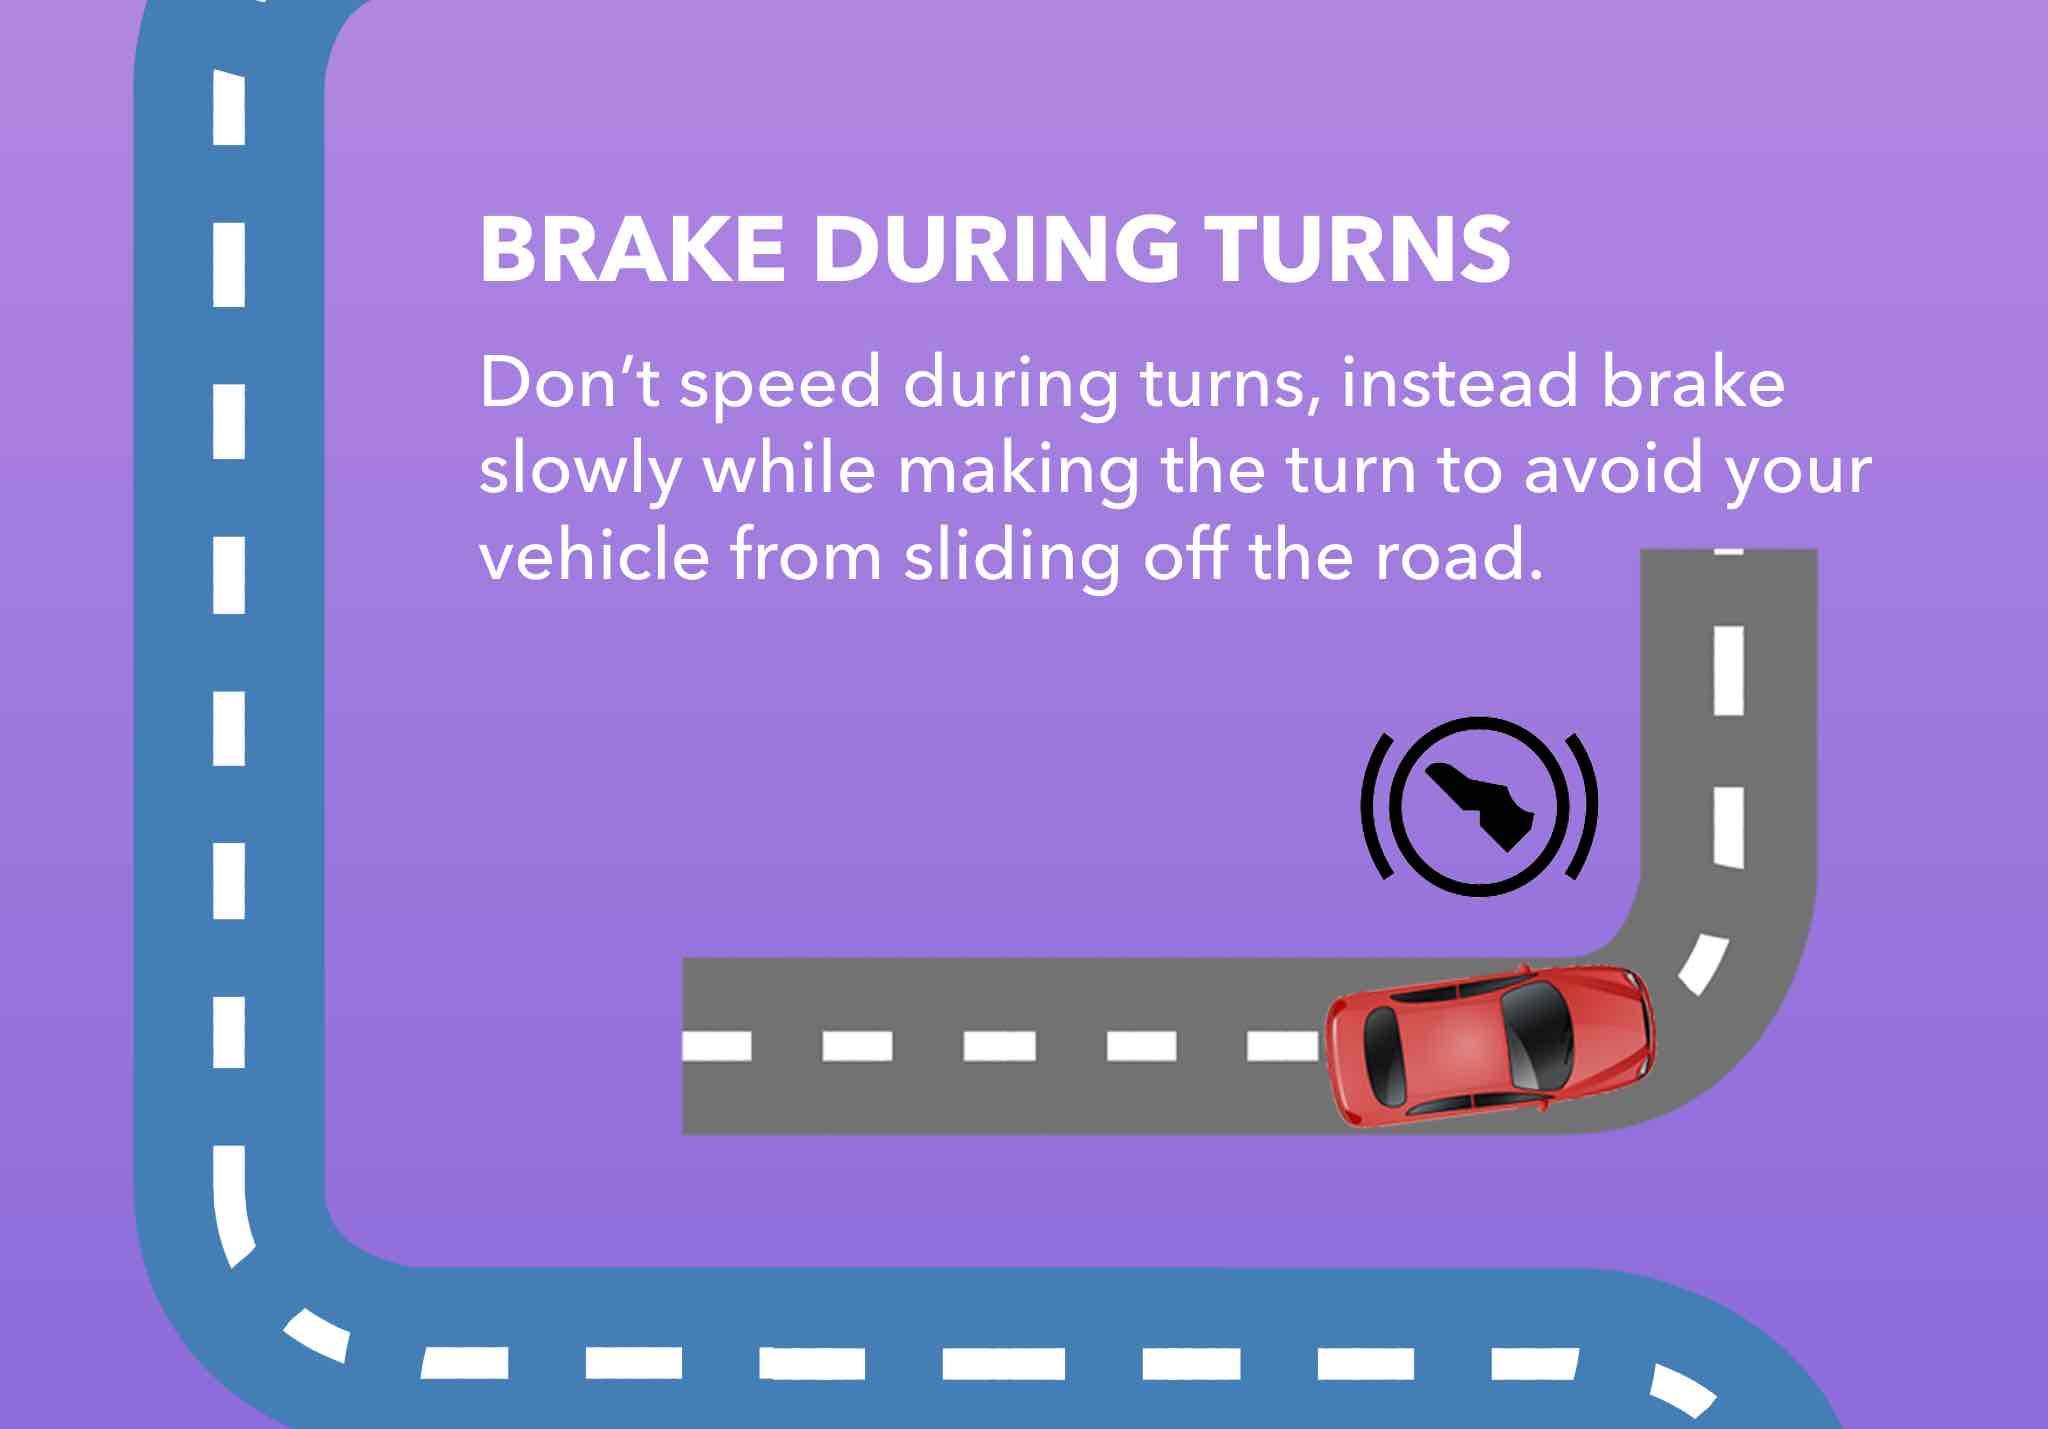 Don’t speed during turns, instead brake slowly while making the turn to avoid your vehicle from sliding off the road.